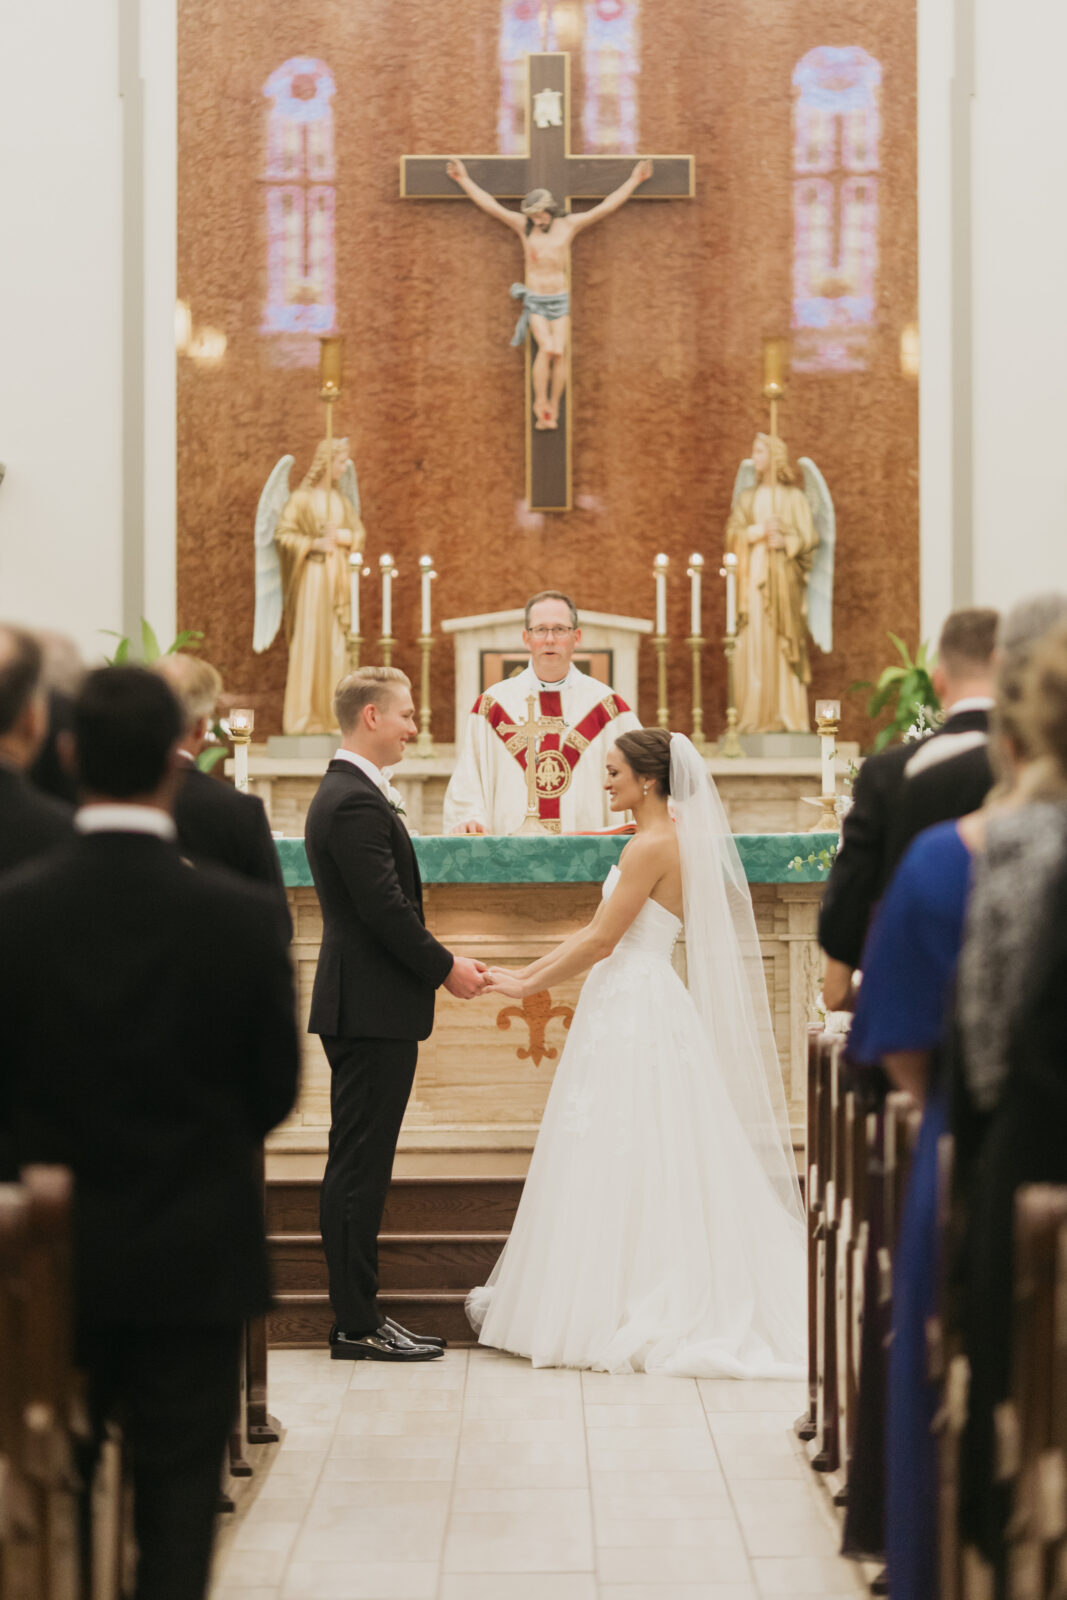 A photo of the bride and groom looking at each other at the altar